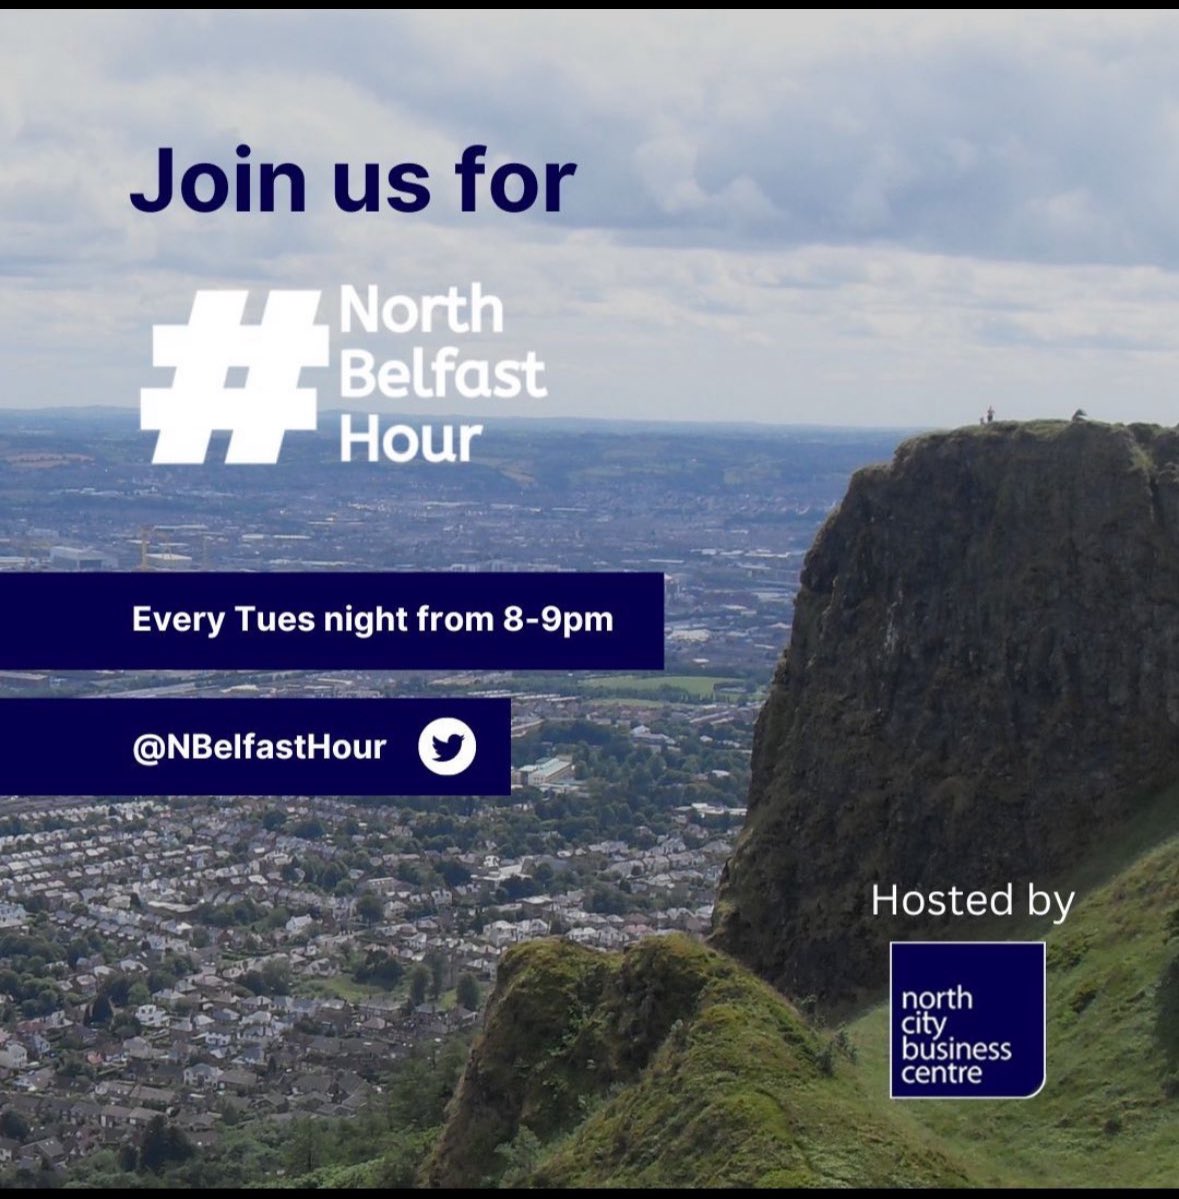 Good evening and welcome to #northbelfasthour join us tonight go Promote you business or community group…how are we all tonight? @MisterVivian @rcb35 @theduncairn @NIMentalHealth @subbytech @FootprintsWomen @womenstec @WeeChicks @Janethypnosis @Taylormaidcc @bfastmenshealth